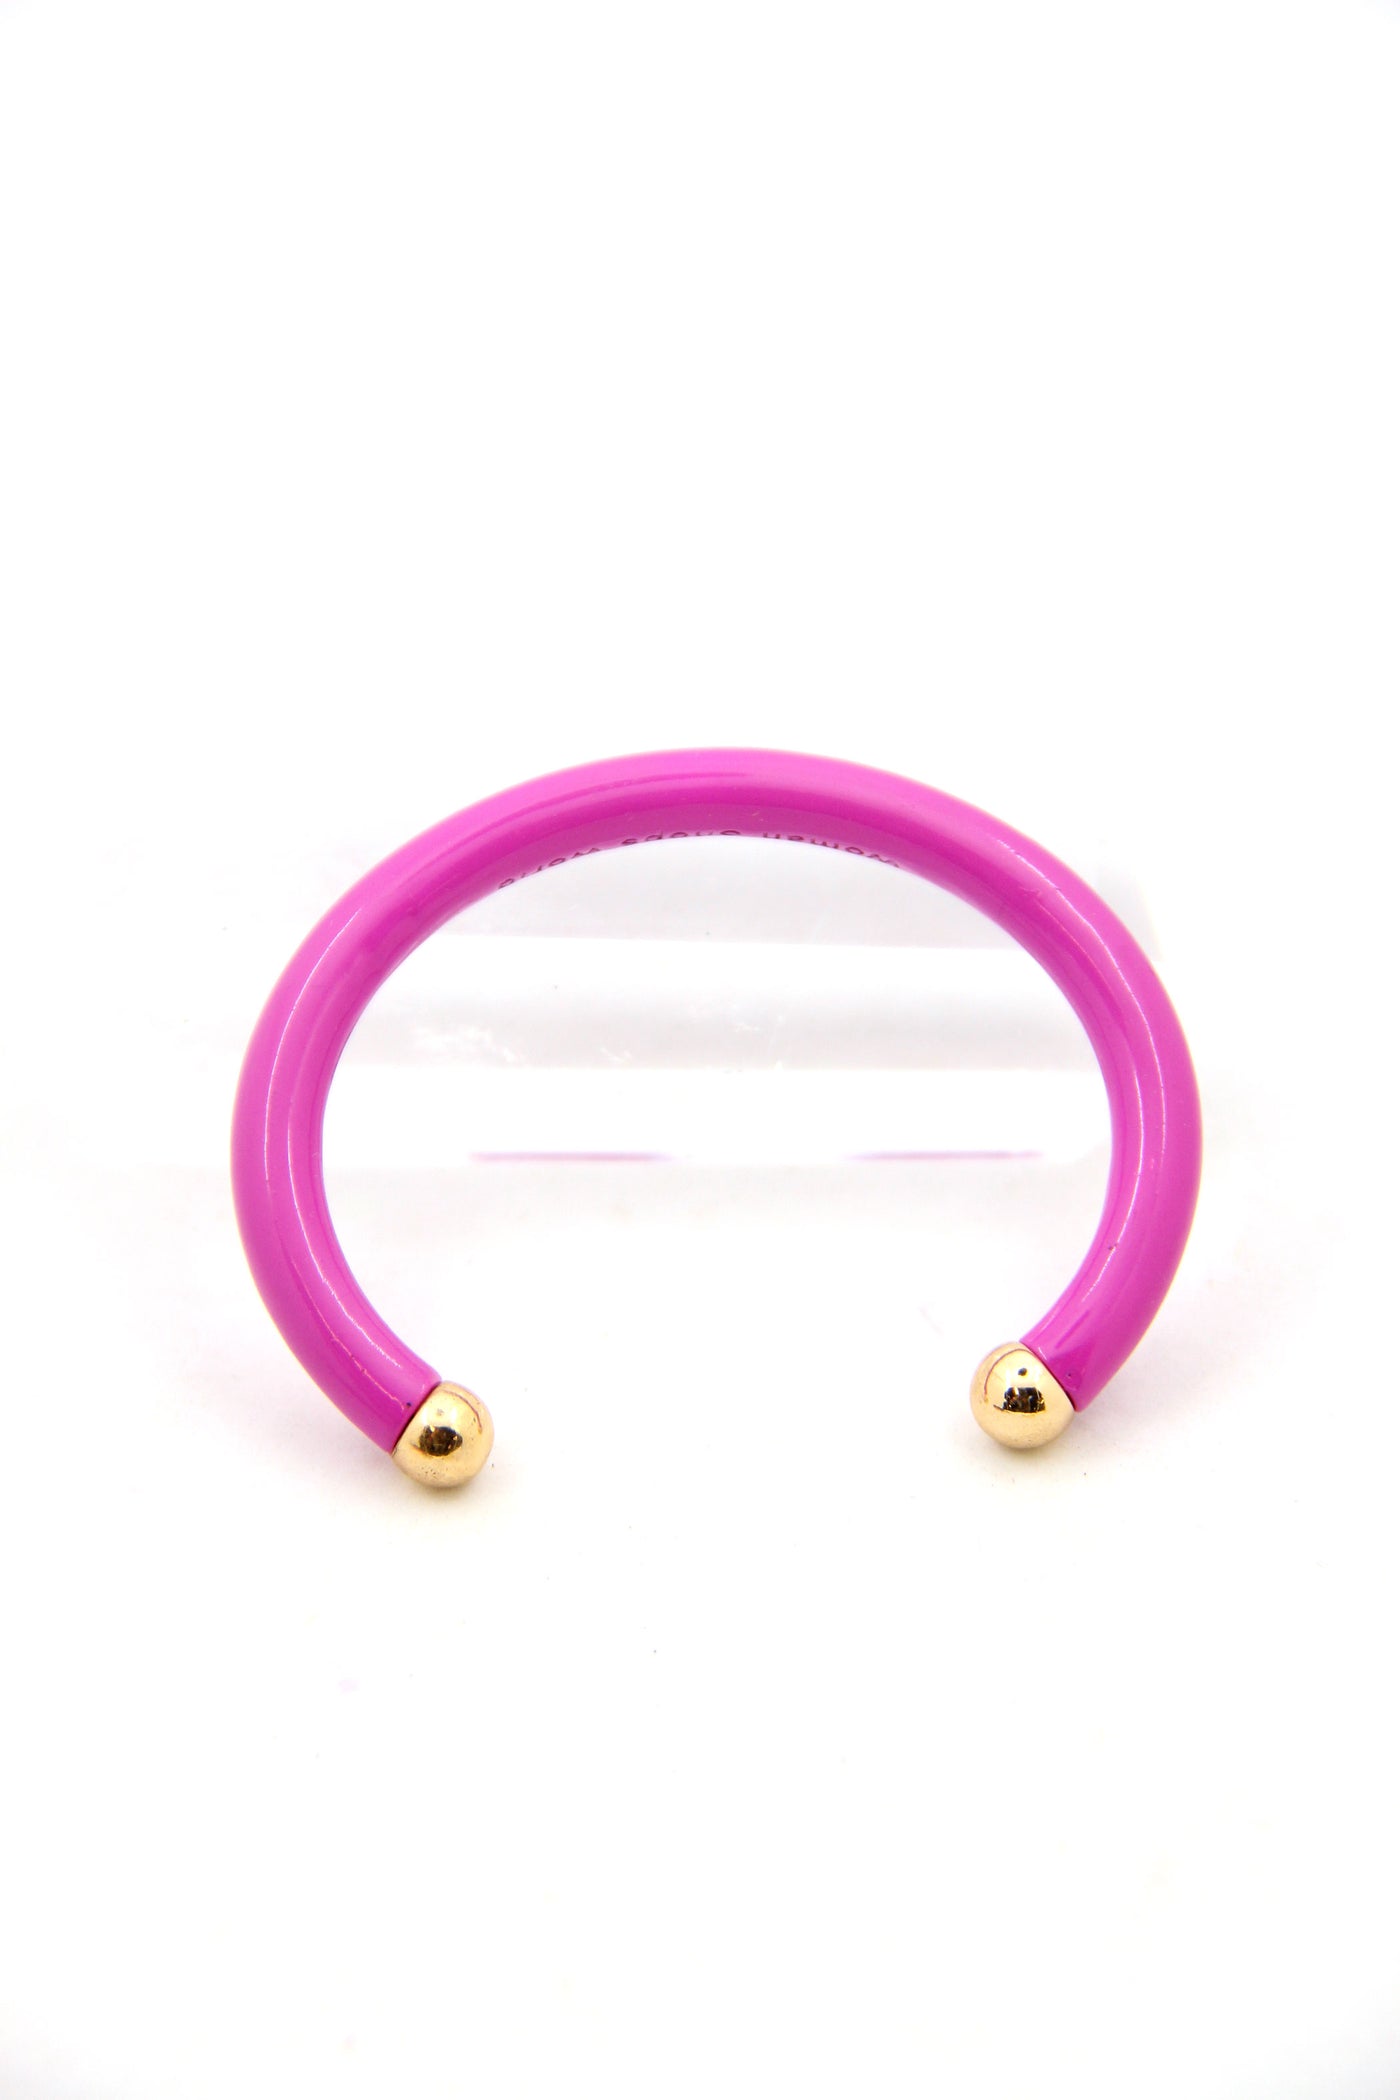 Raspberry Luxe Enamel Cuff Bracelet with Golden Ball Ends, Colorful Arm Stack, 1 Bangle